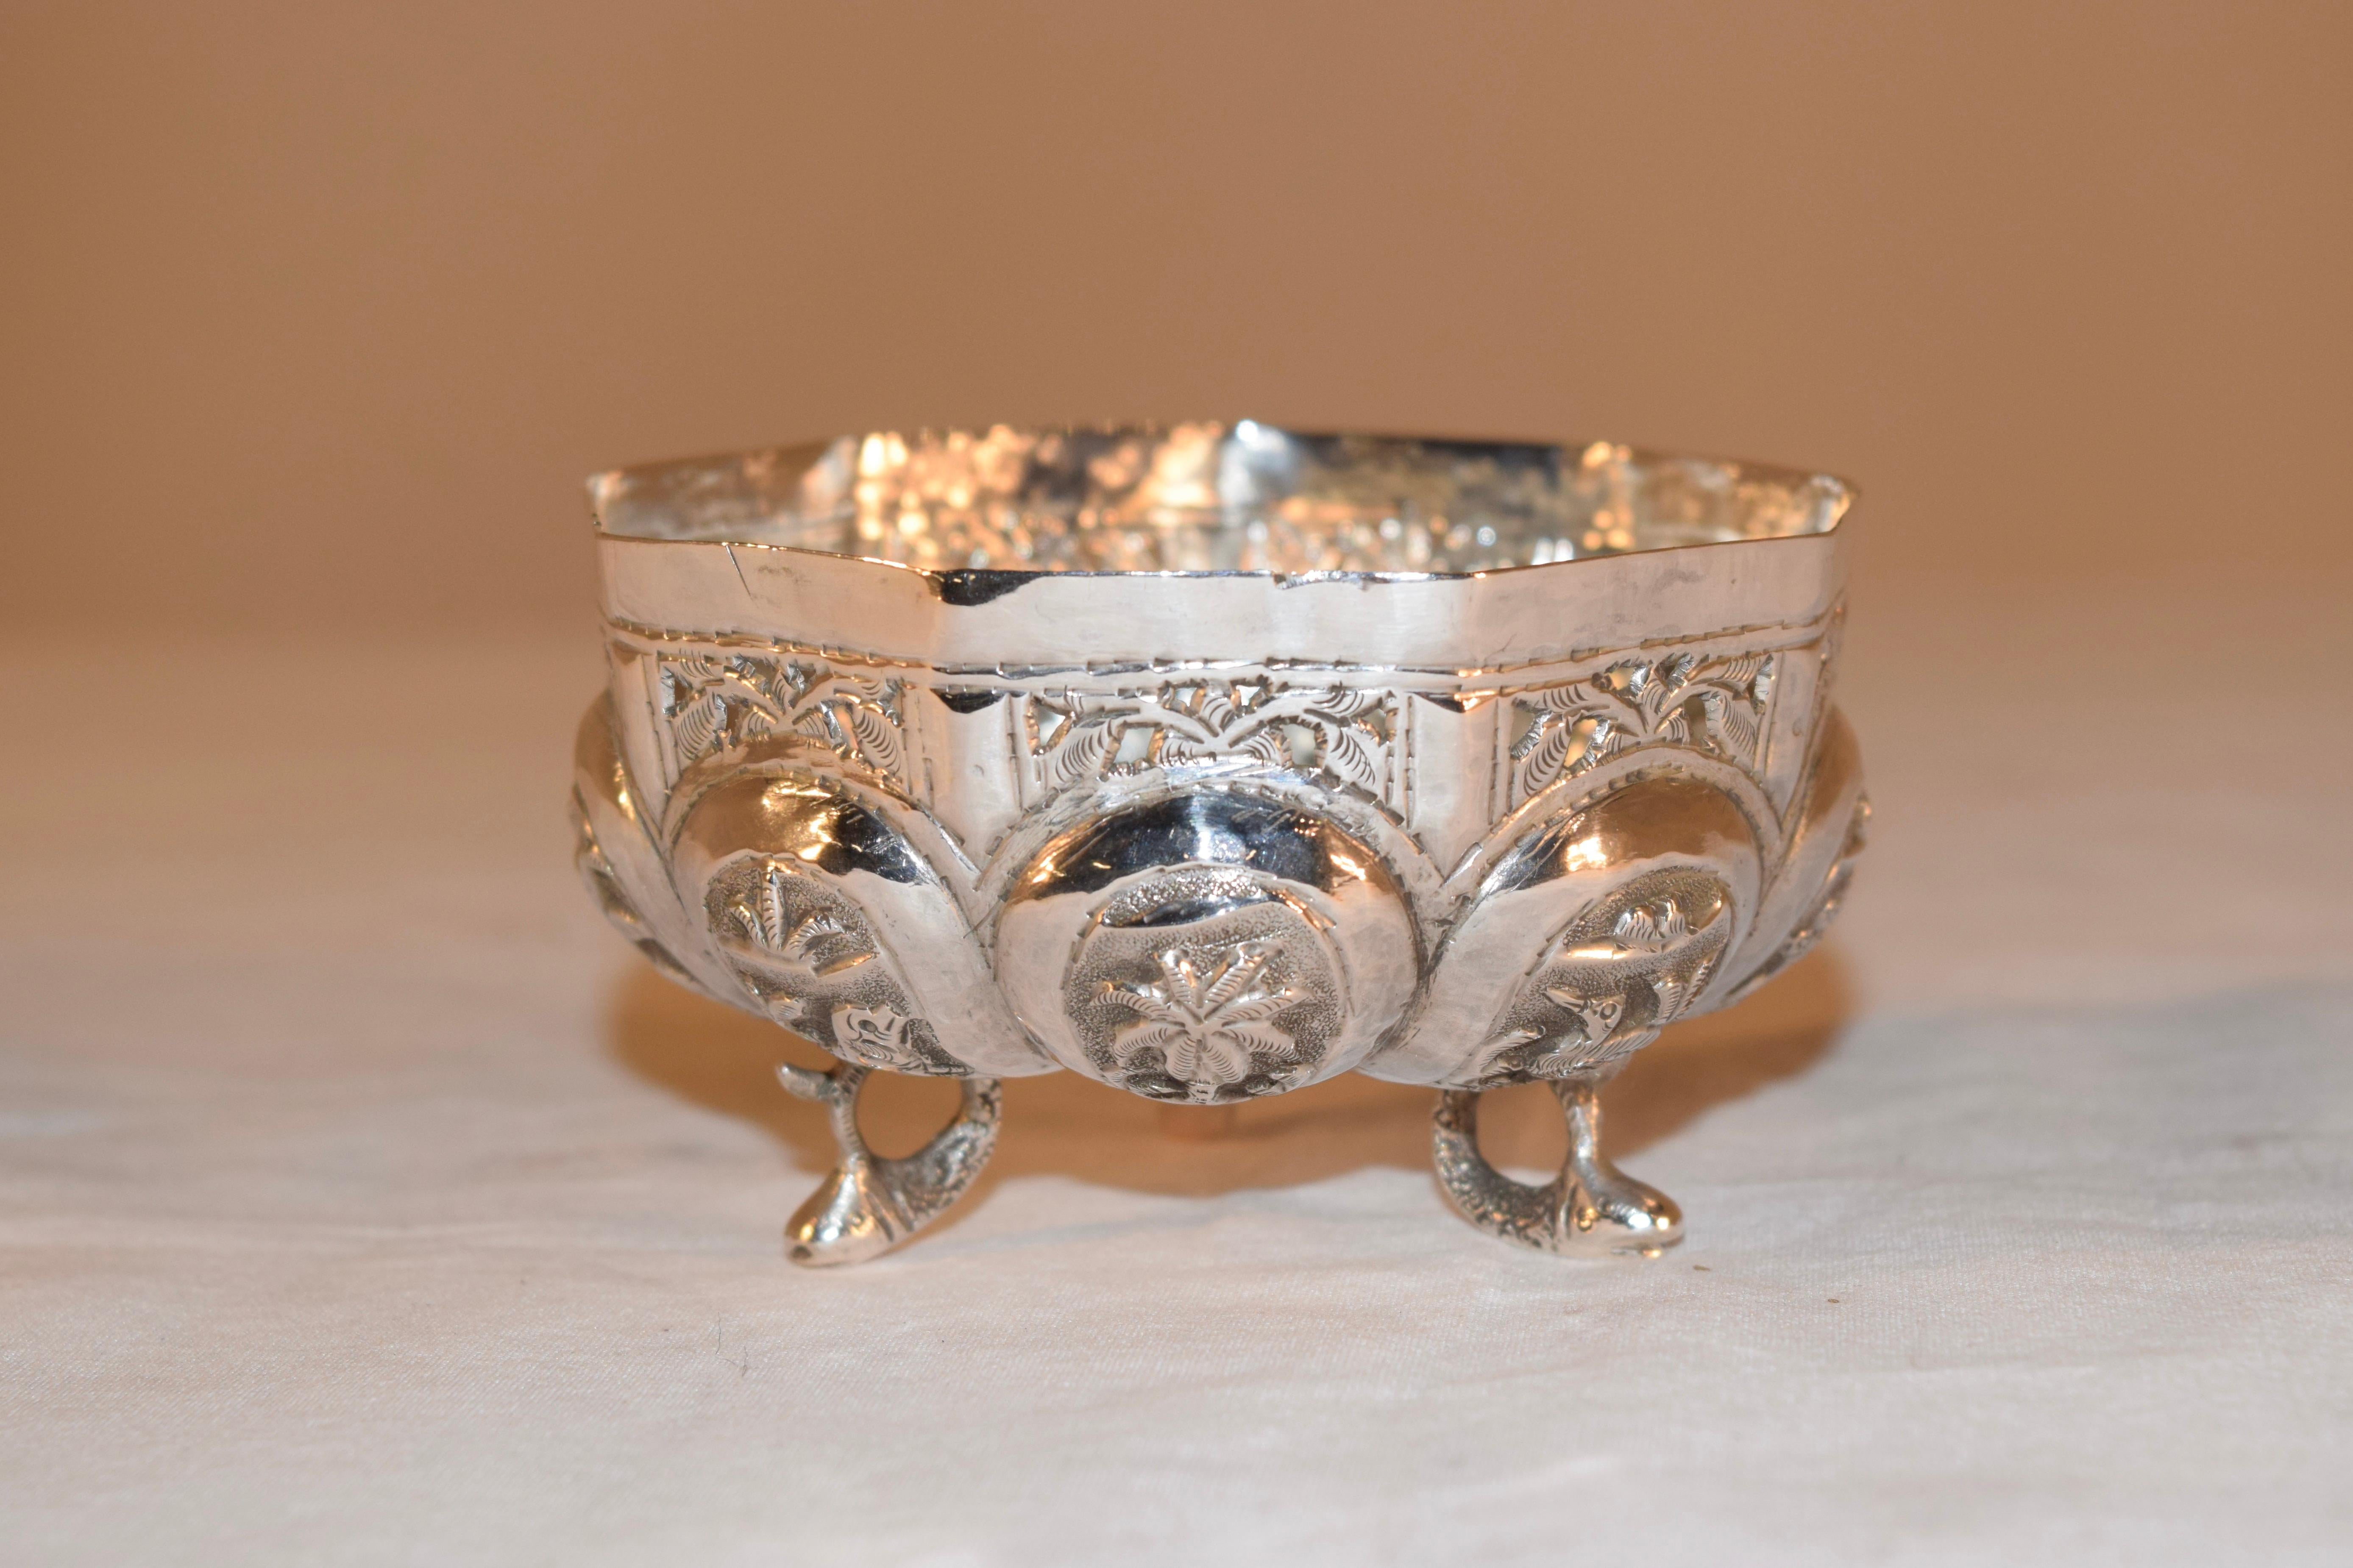 19th century Anglo-Indian silver bowl with a rounded melon shaped base decorated with medallions which have pictures of animals and palms, under a rim which has lovely reticulated foliage. Supported on three fish feet.